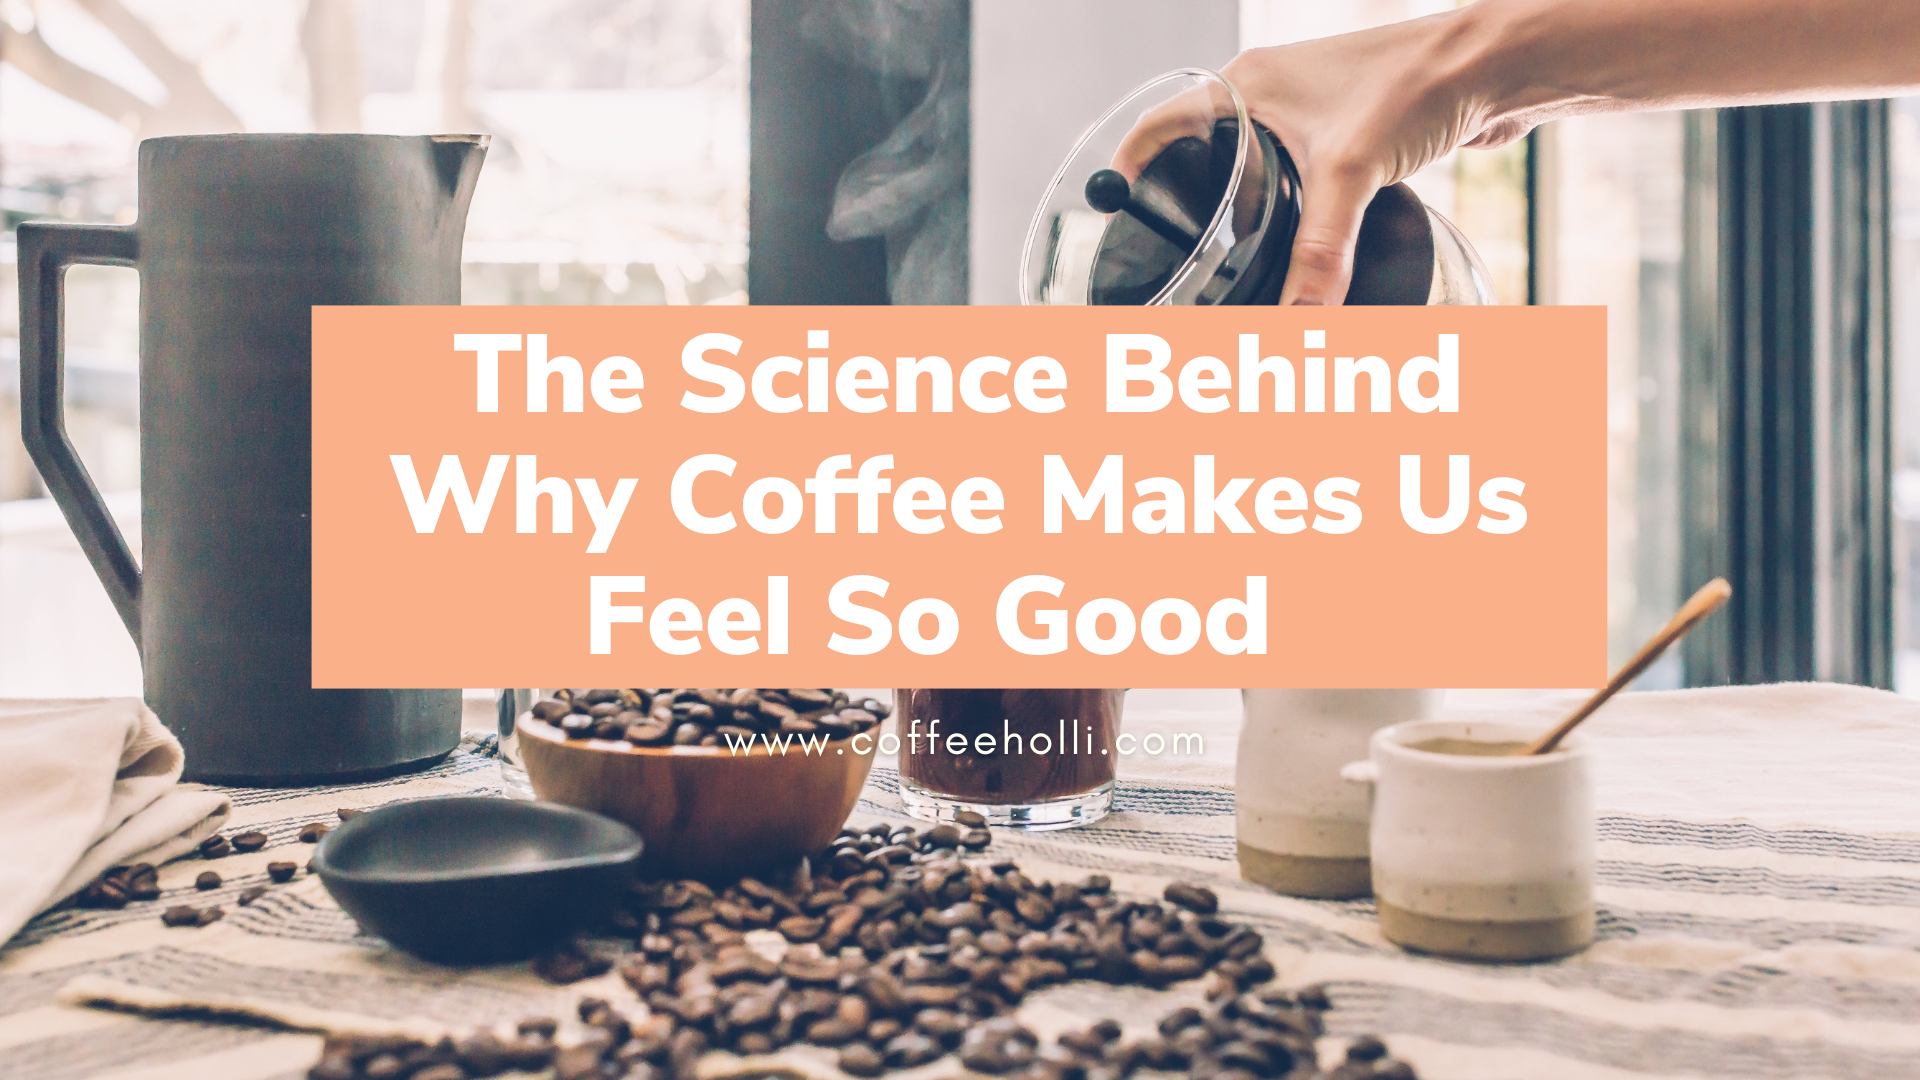 The Science Behind Why Coffee Makes Us Feel So Good